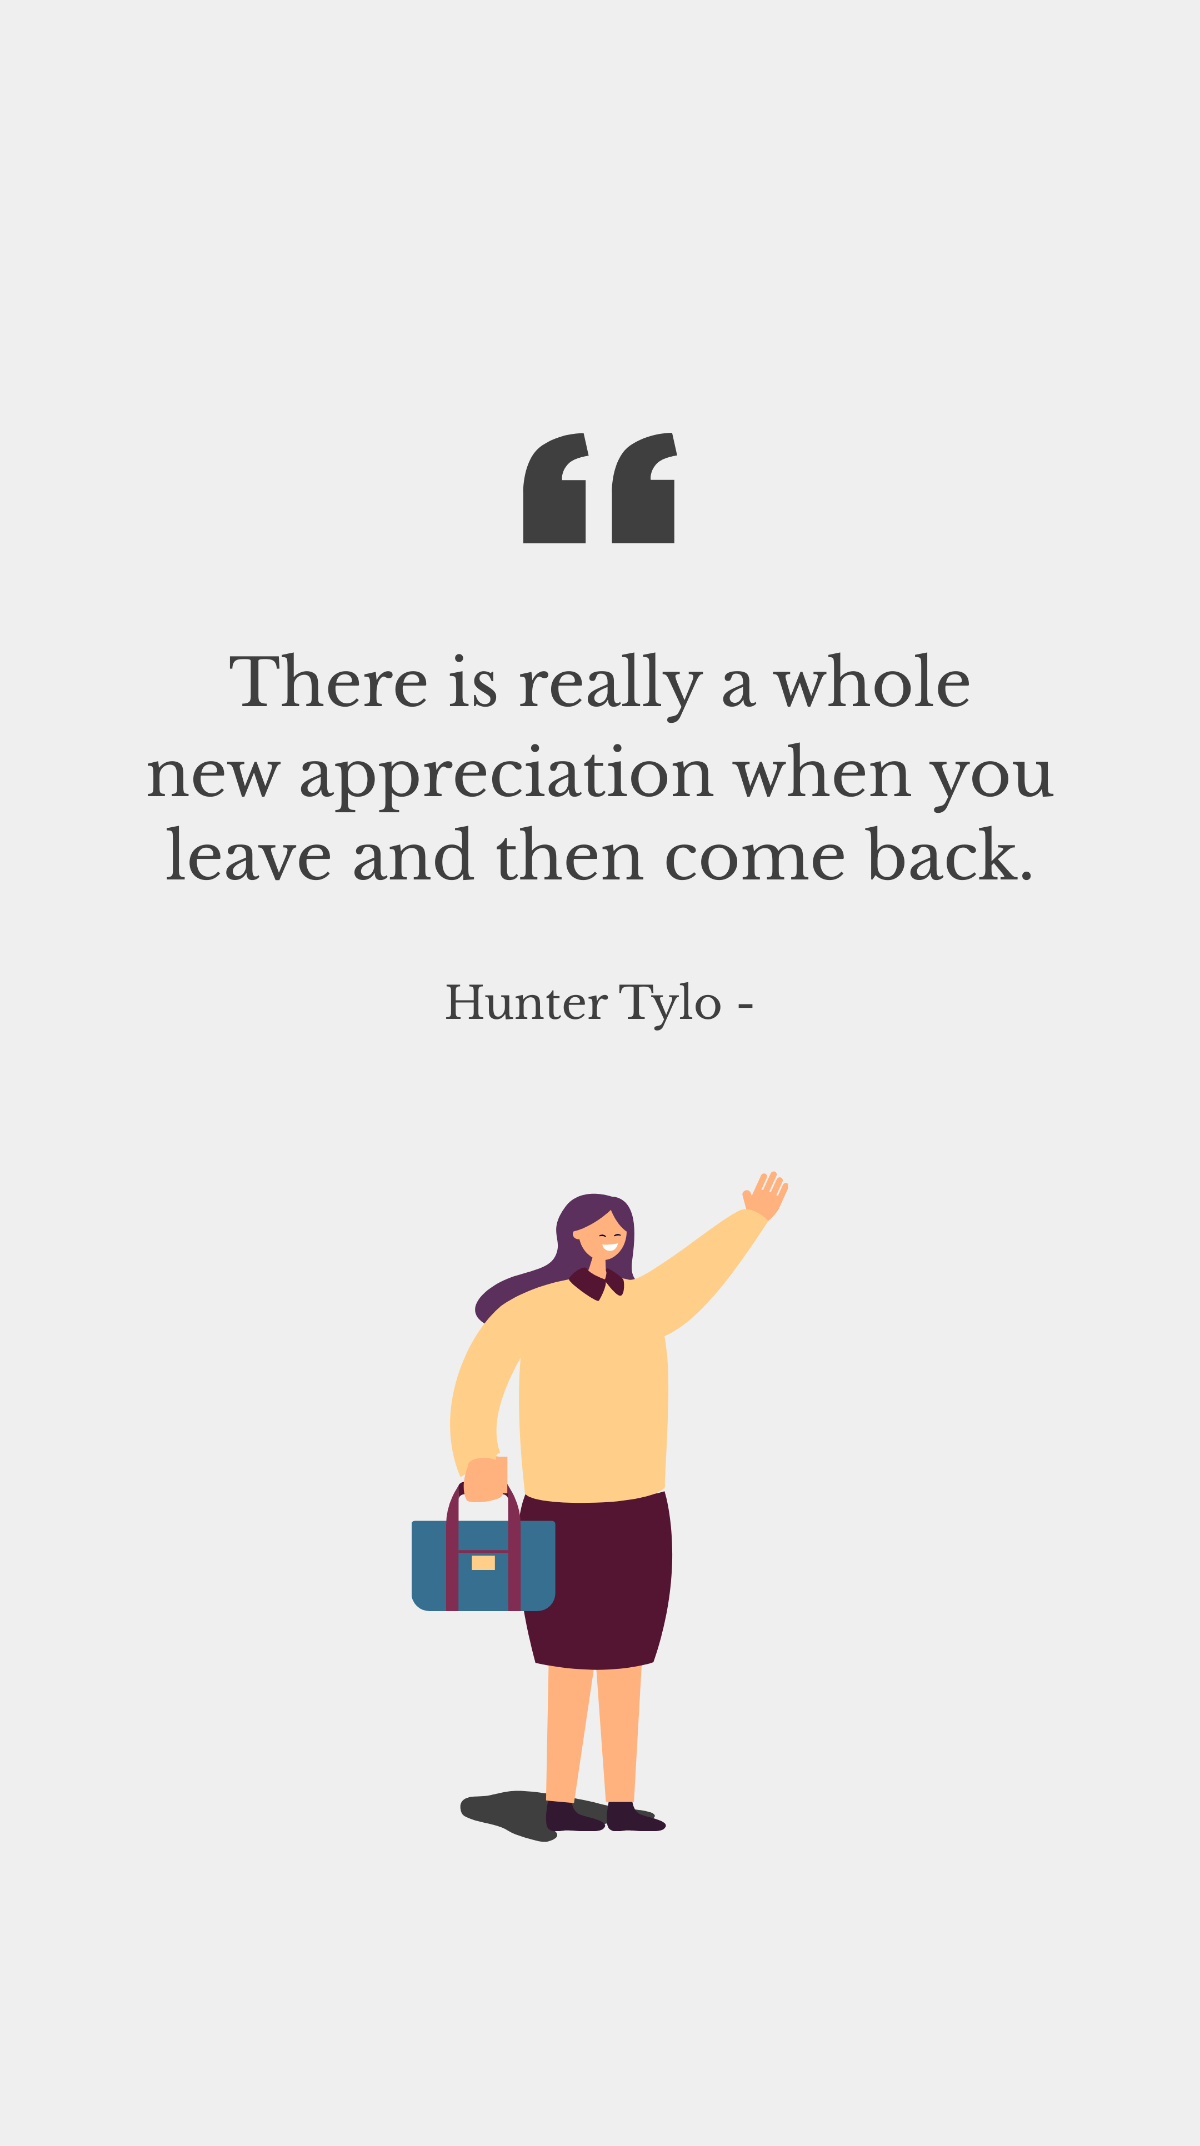 Hunter Tylo - There is really a whole new appreciation when you leave and then come back. Template